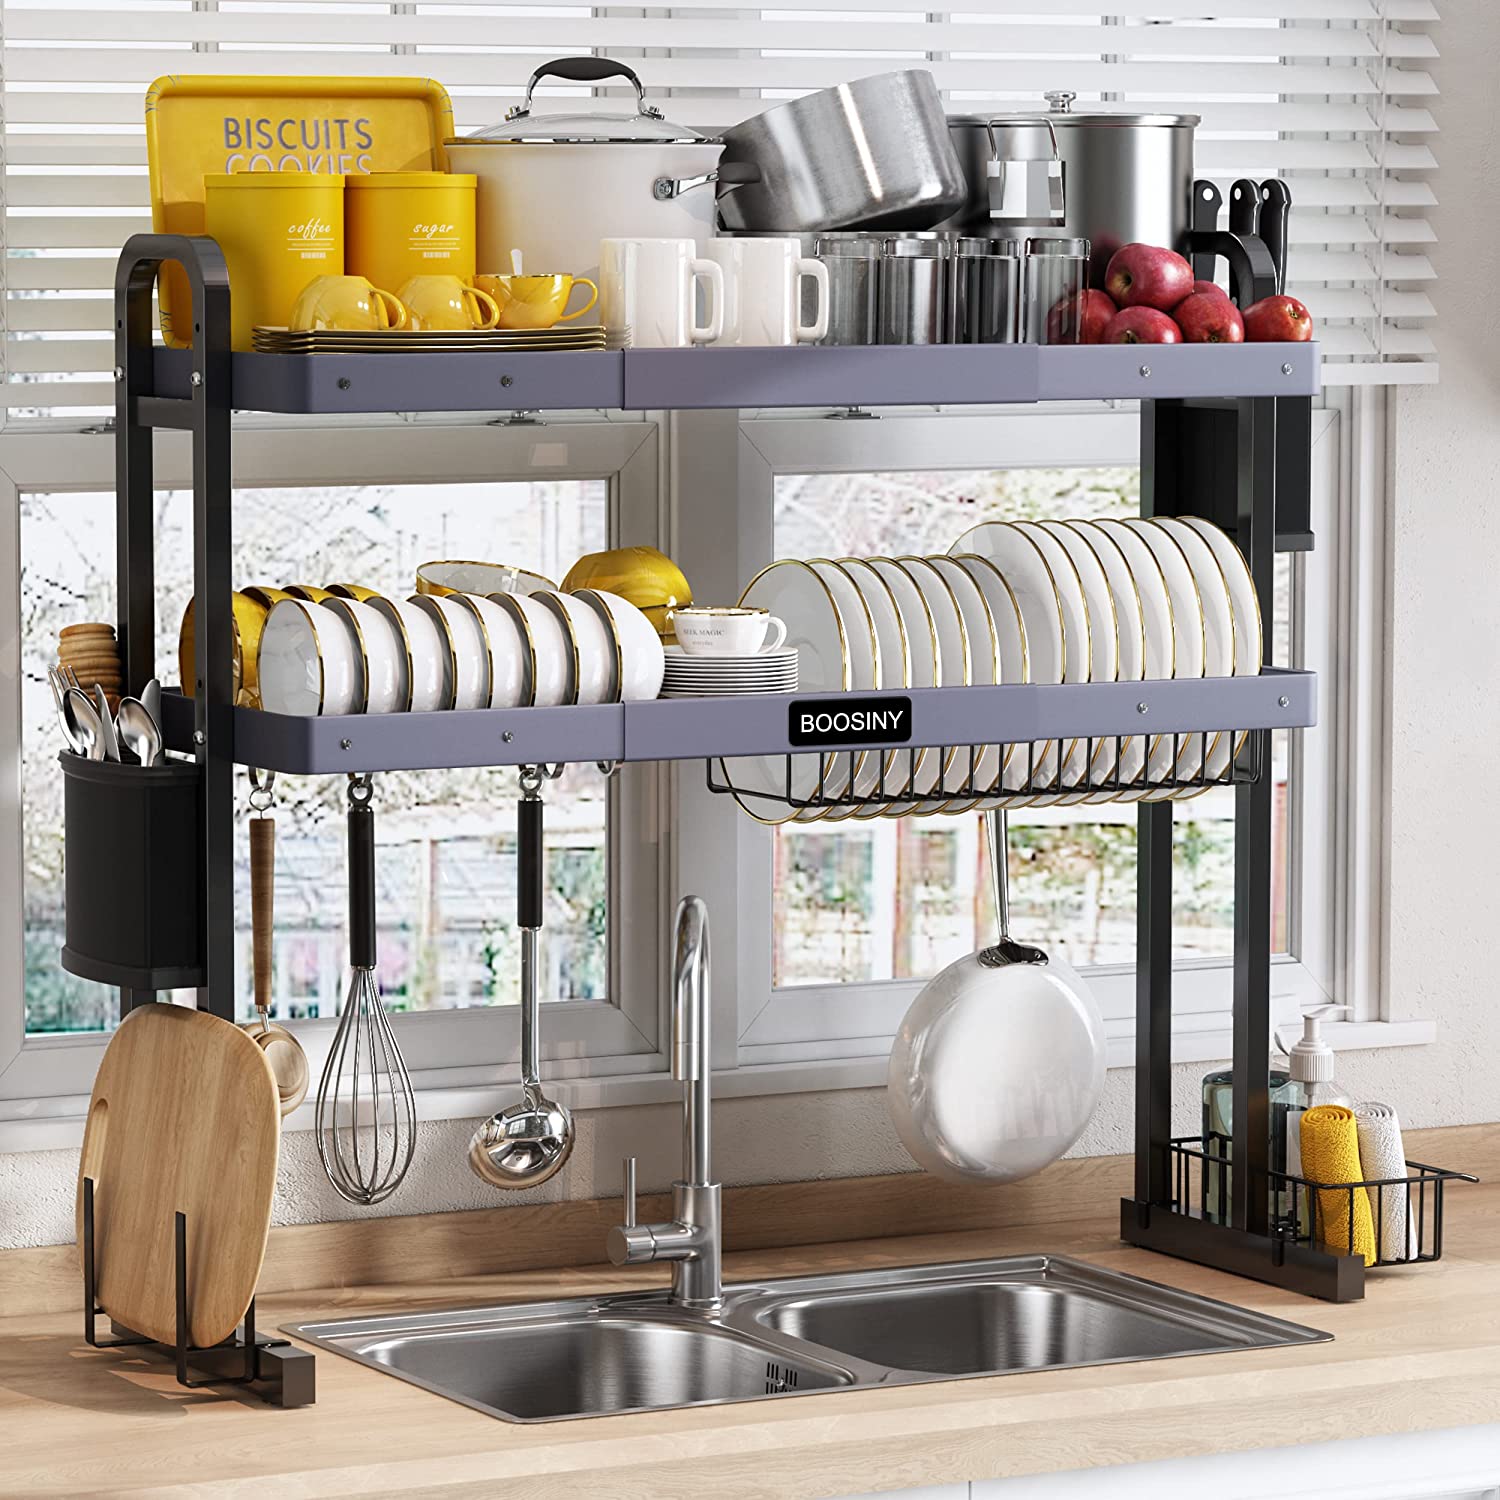  2. Boosiny Adjustable 2 Tier Stainless Steel Over Sink Dish Drying Rack 